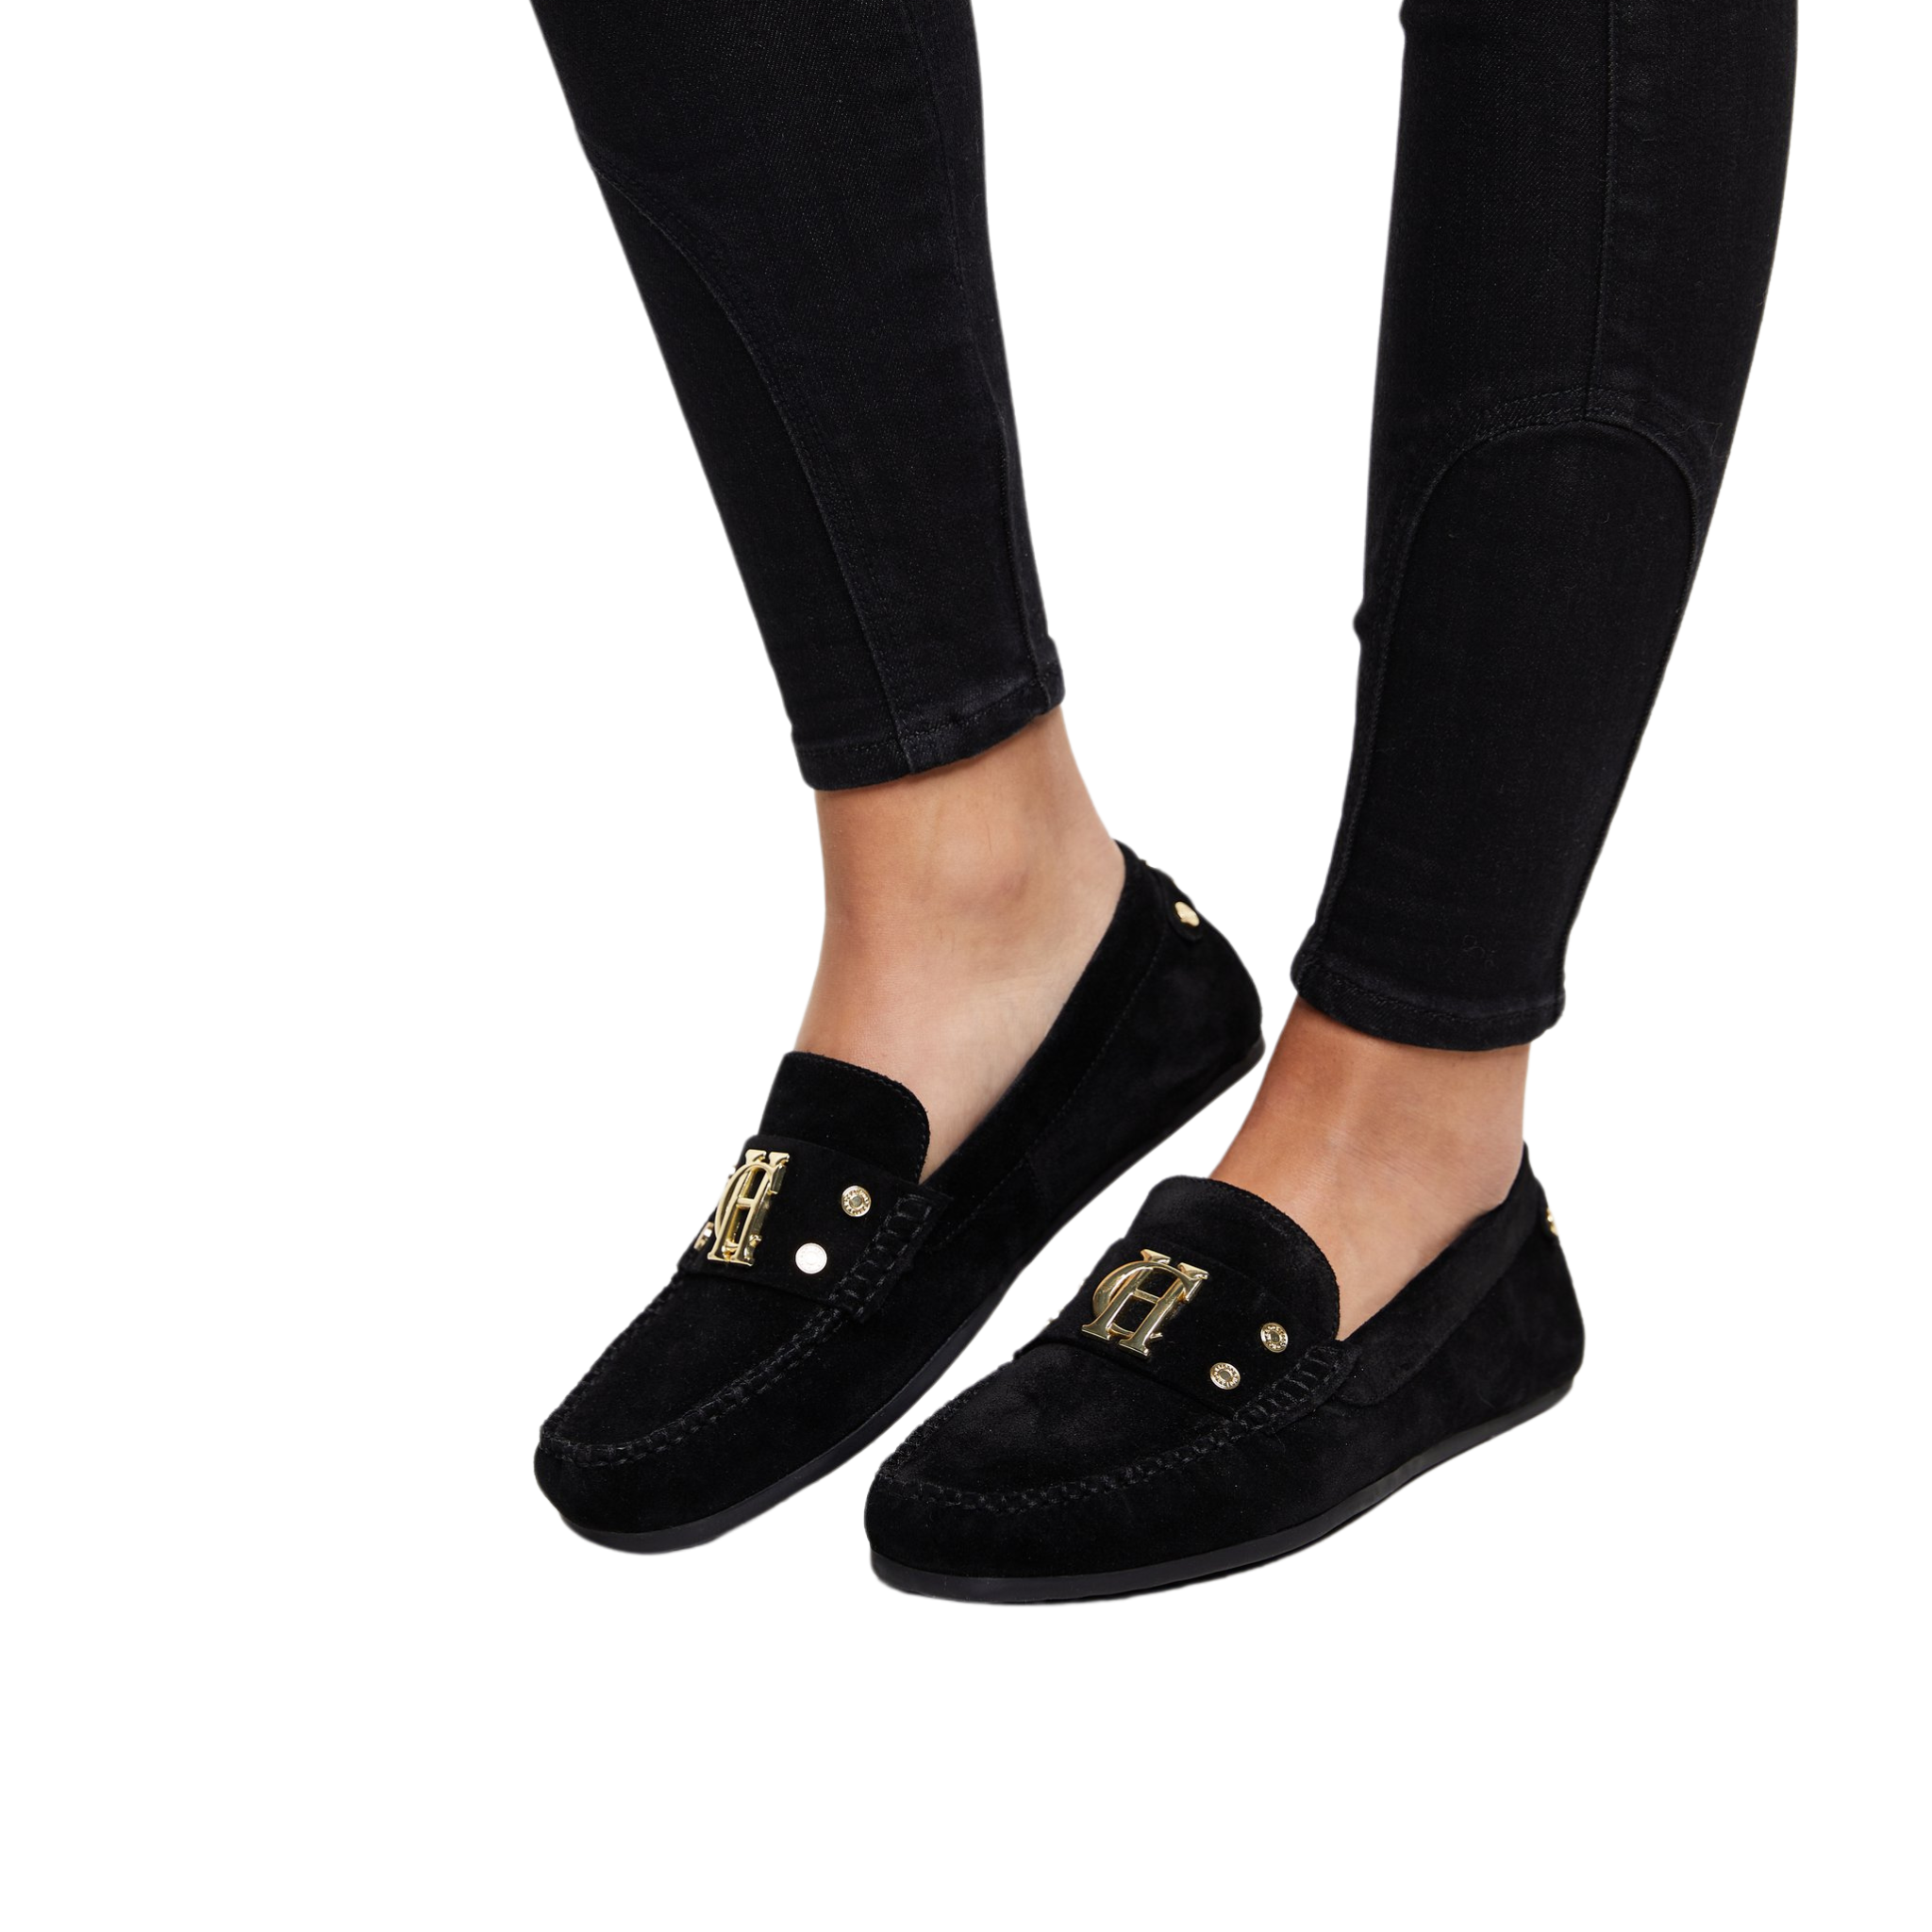 The Driving Loafer Black Suede